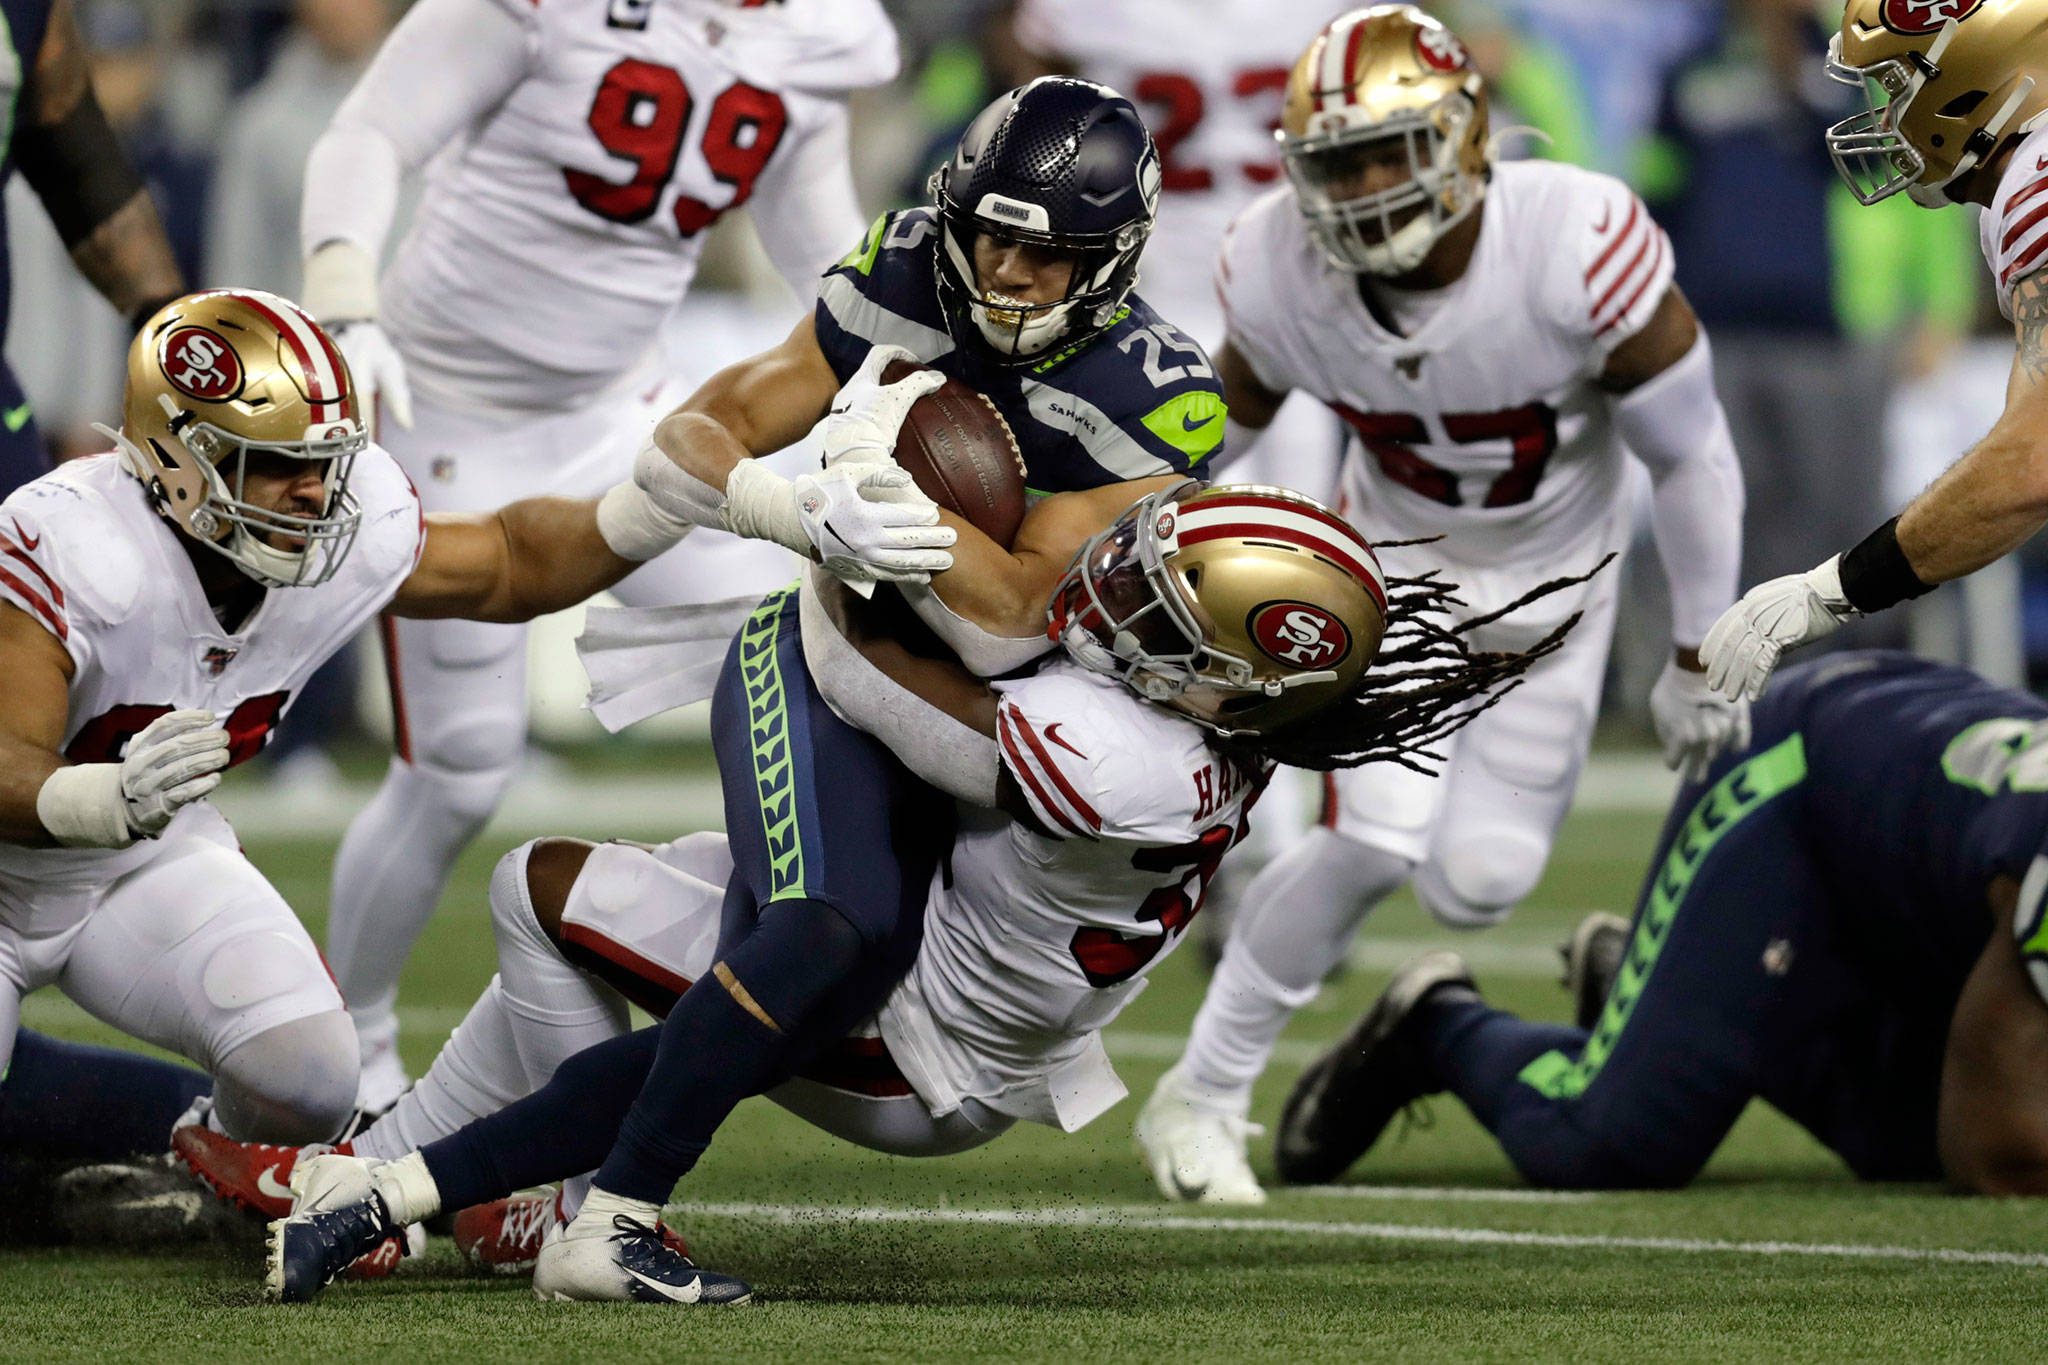 Seahawks running back Travis Homer (25) is brought down by the 49ers’ Marcell Harris on a carry during the first half of a game this past Sunday in Seattle. (AP Photo/Stephen Brashear)